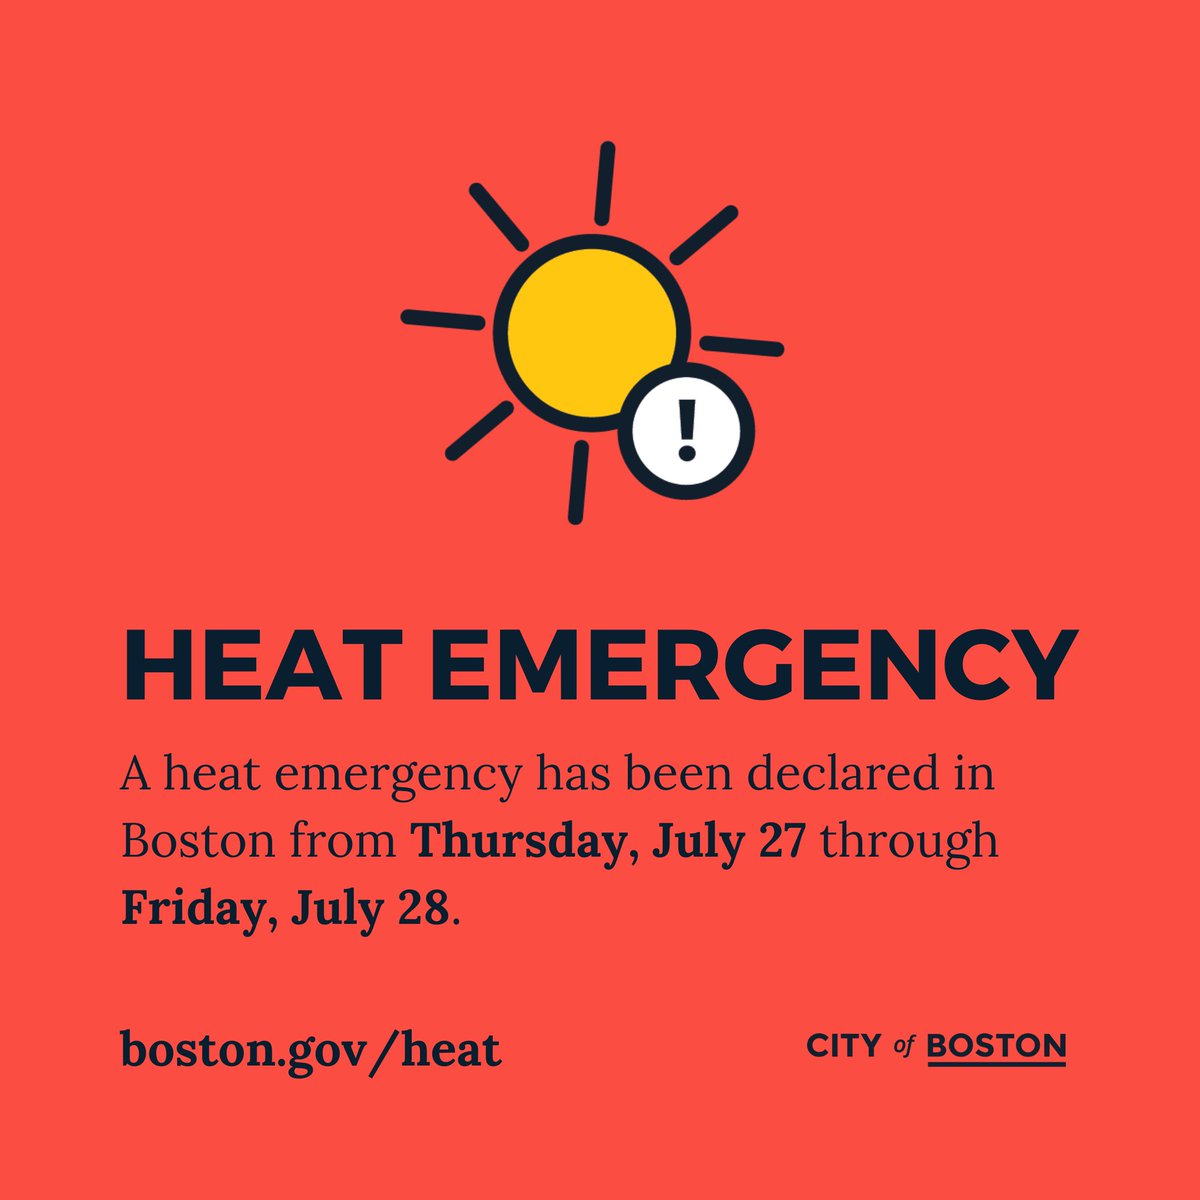 A heat emergency has been declared in Boston from Thursday, July 27 through Friday, July 28 due to the upcoming weather forecasts. Call @BOS311 with any questions about available, non-emergency City services. Learn more about heat safety at boston.gov/heat